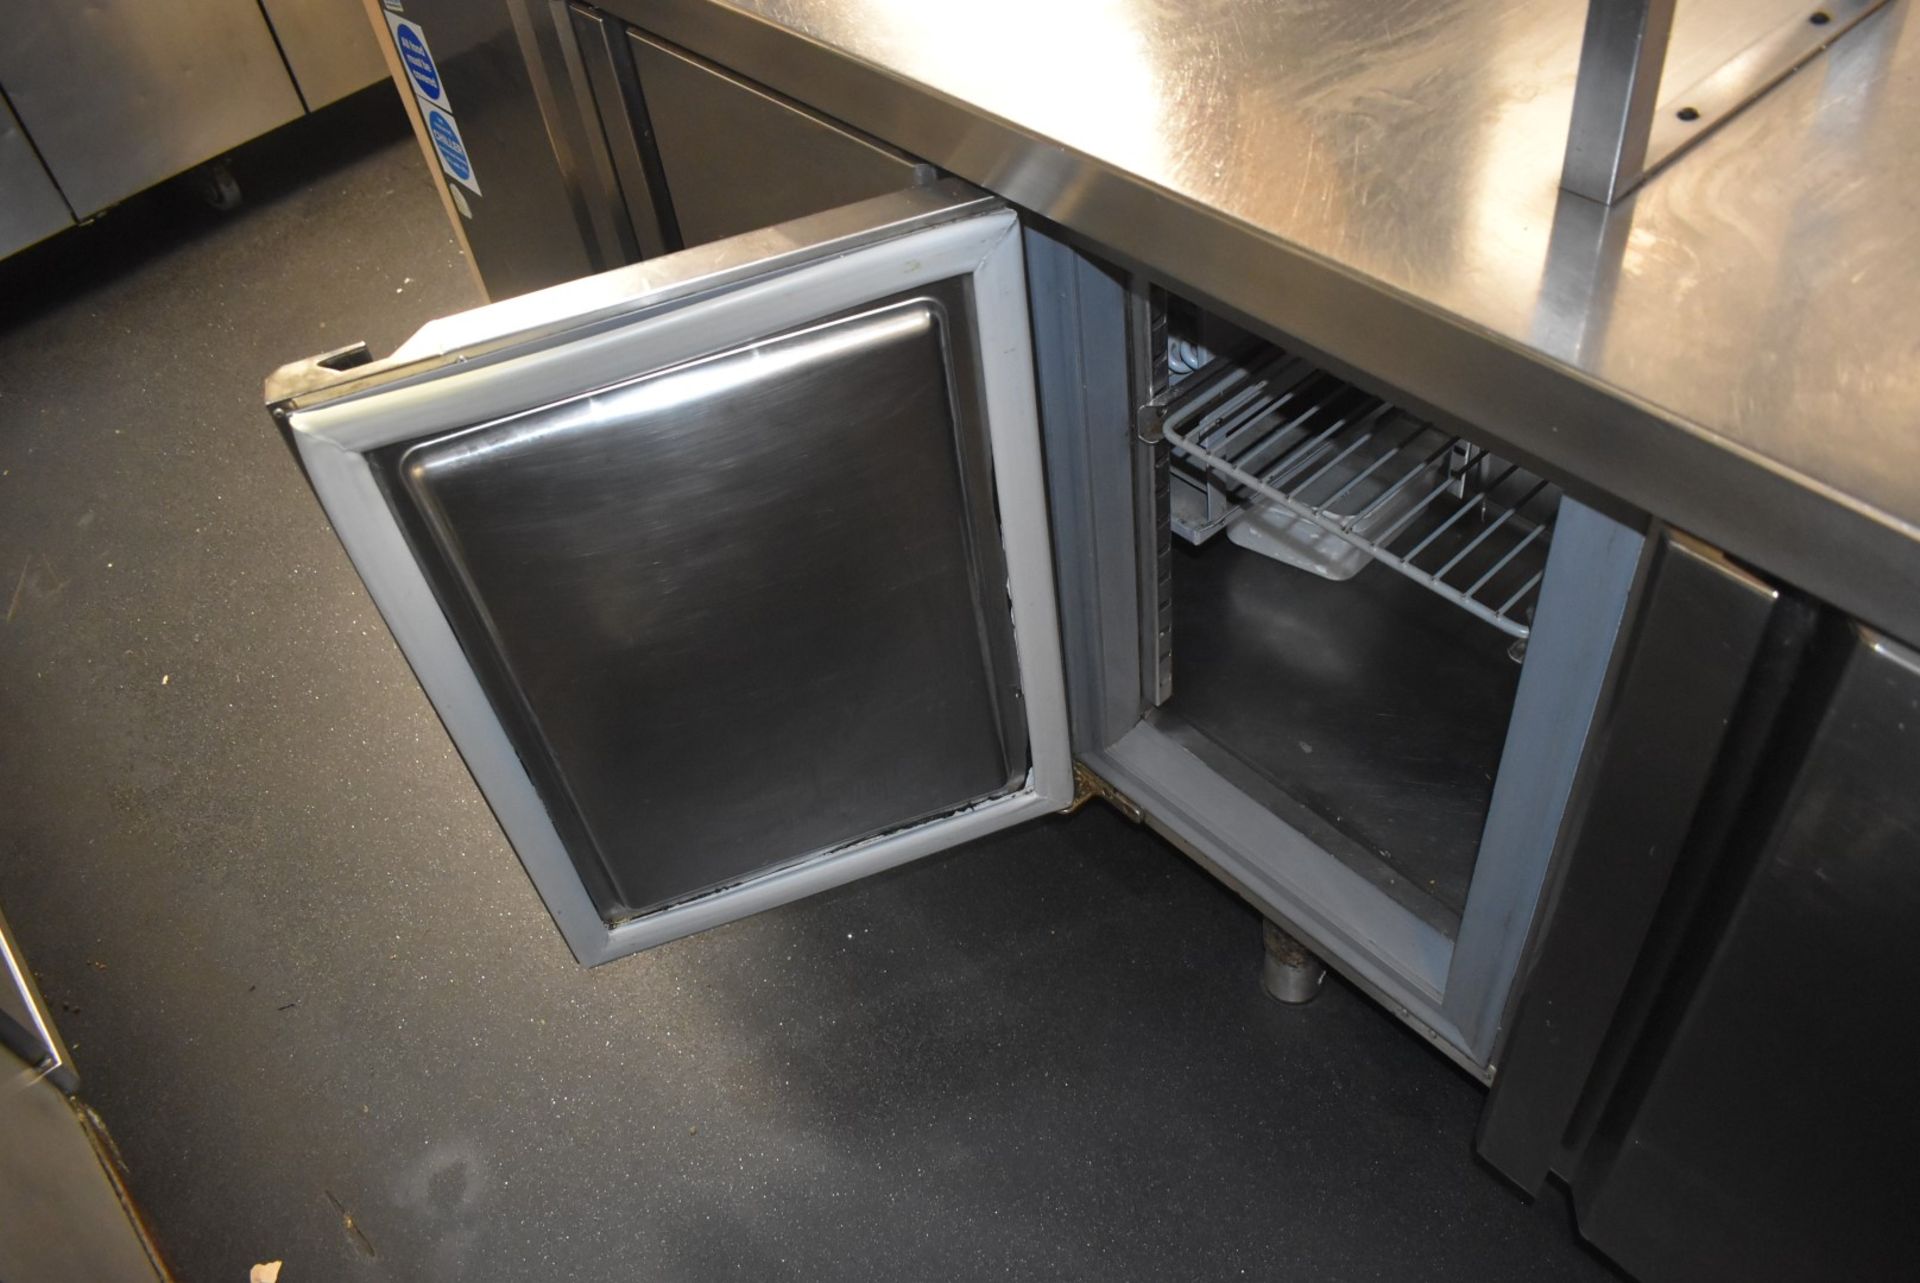 1 x Infrico 4 Door Countertop Refrigerator With Passthrough Shelves and Ticket Rails - Image 11 of 18